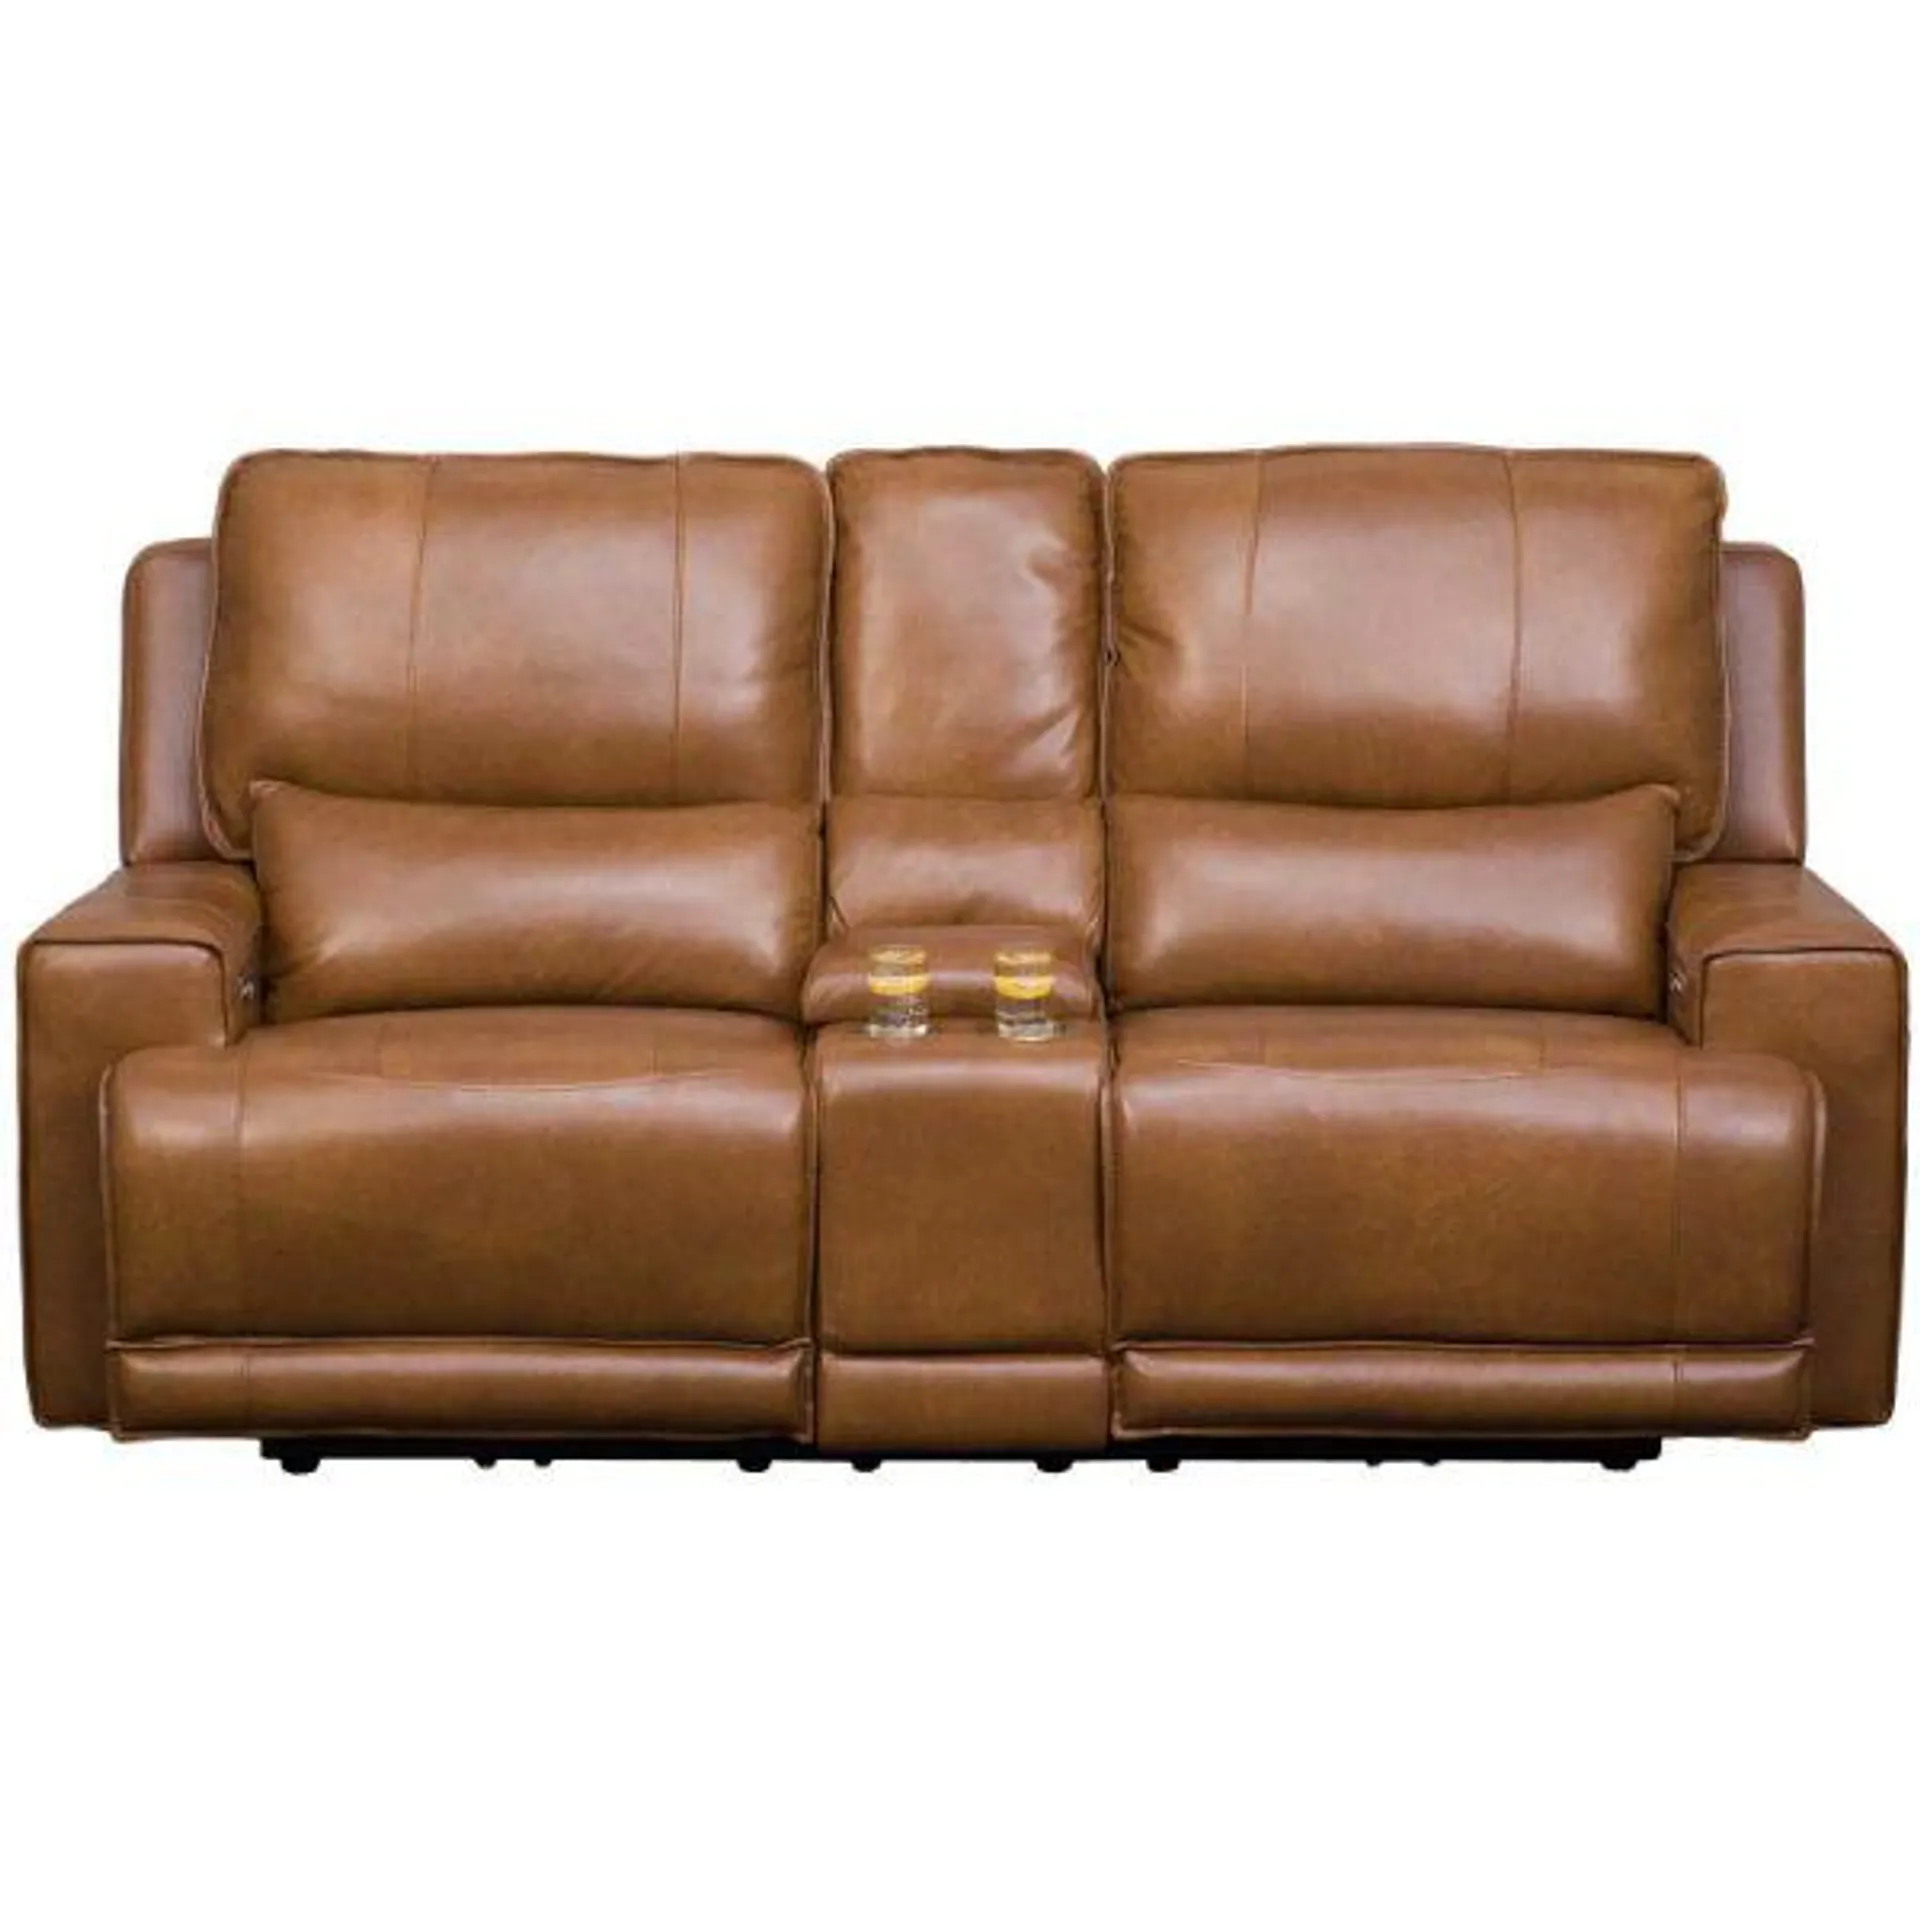 Rhen Leather Dual Power Reclining Console Loveseat